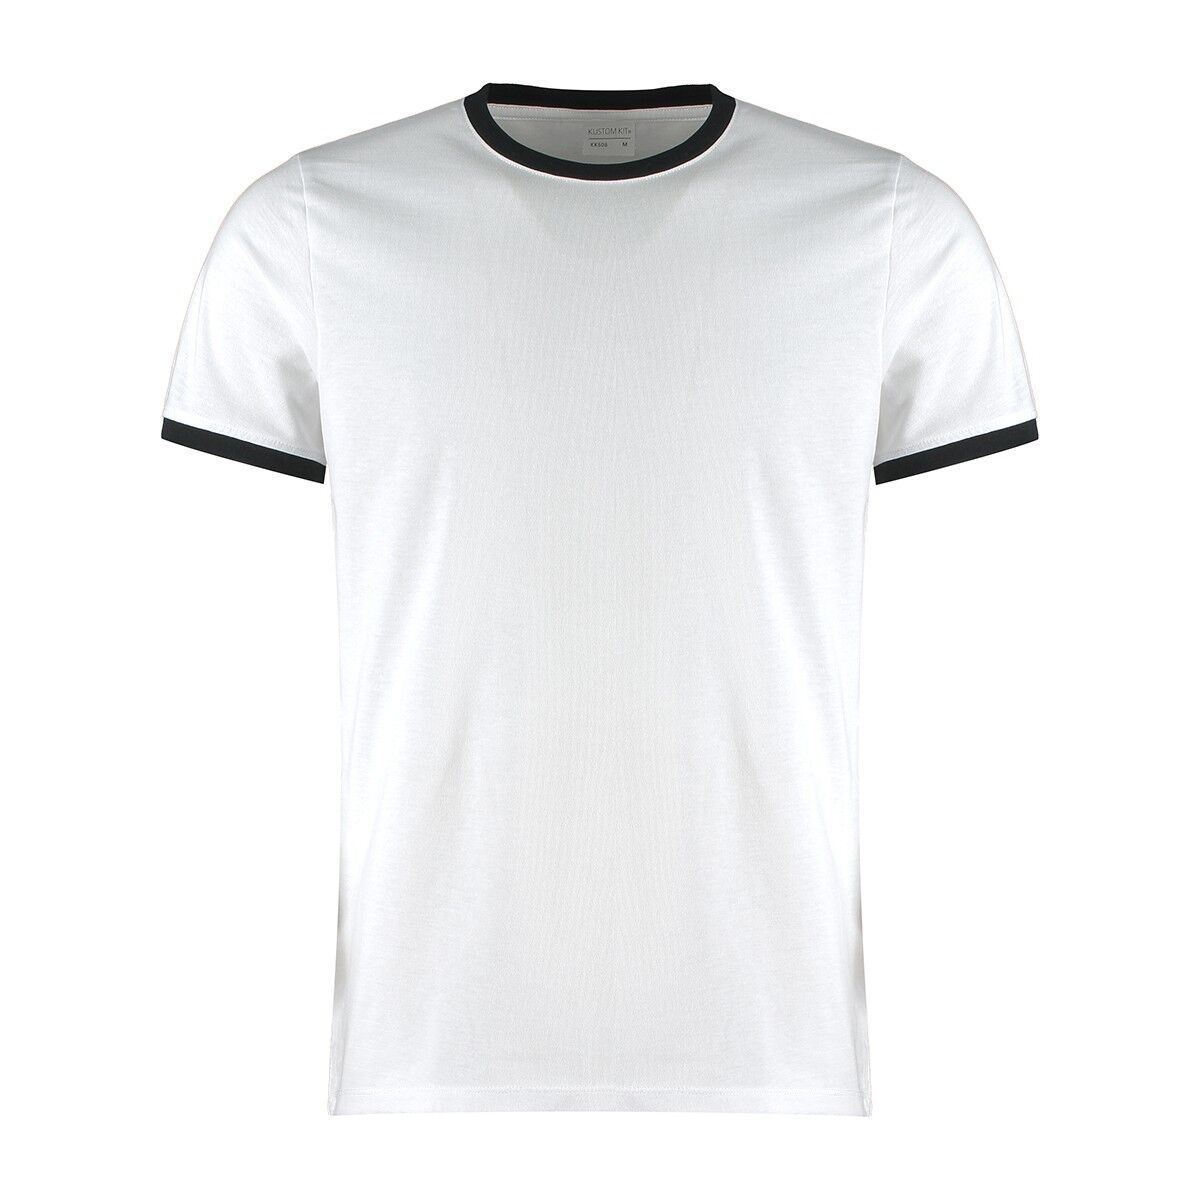 Contrast Ring Tee in Black/White